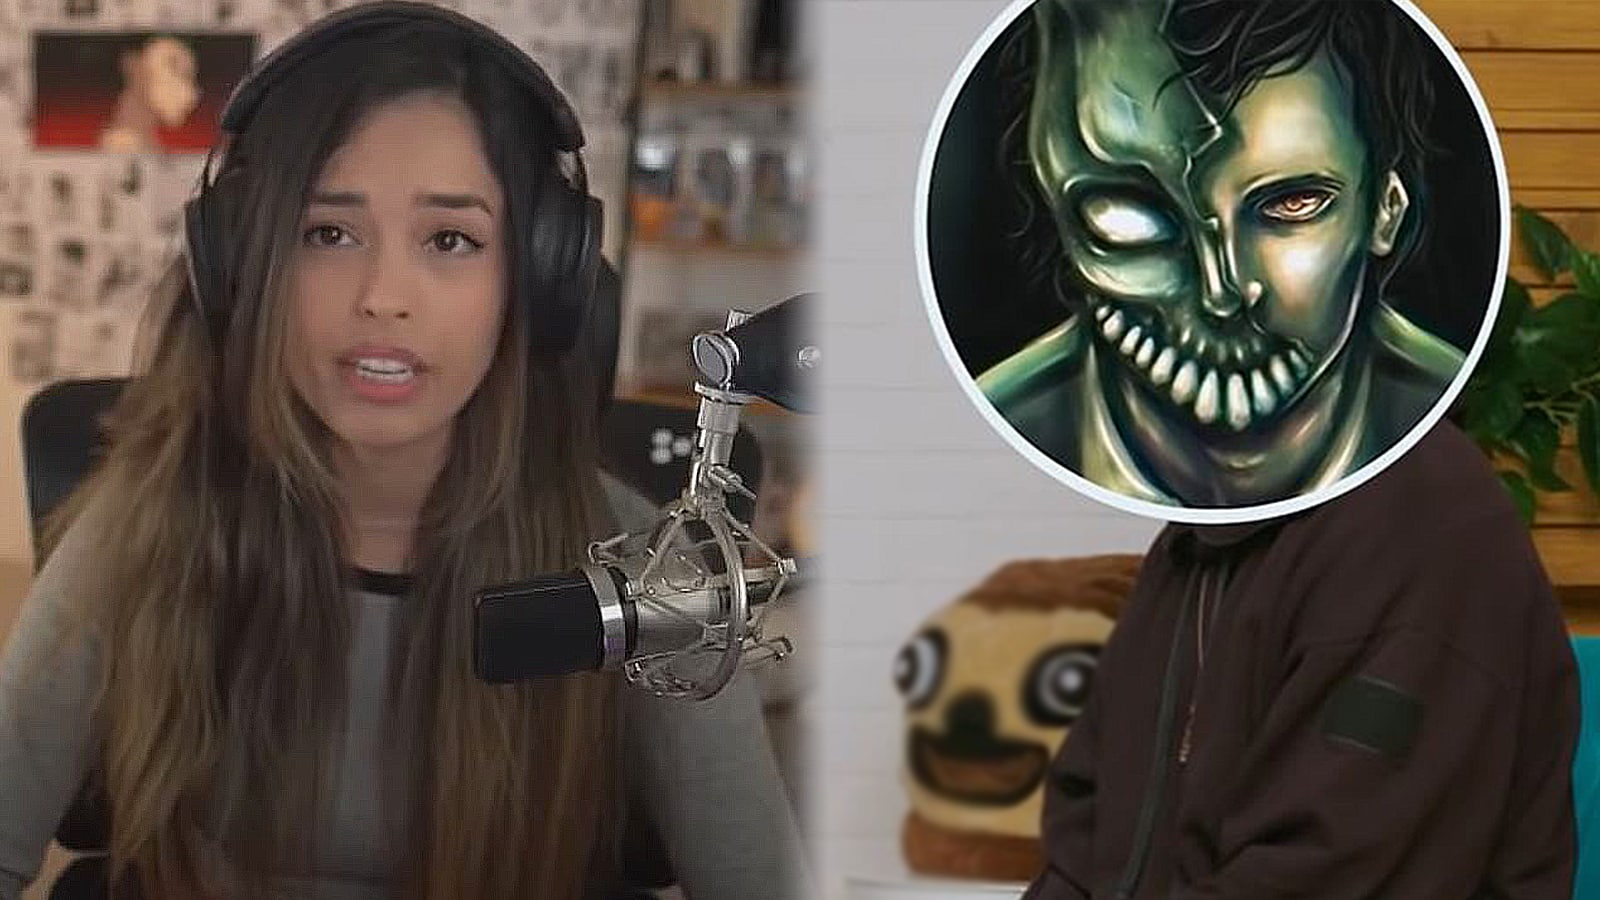 Valkyrae defends Corpse Husband after “face reveal” drama - Dexerto